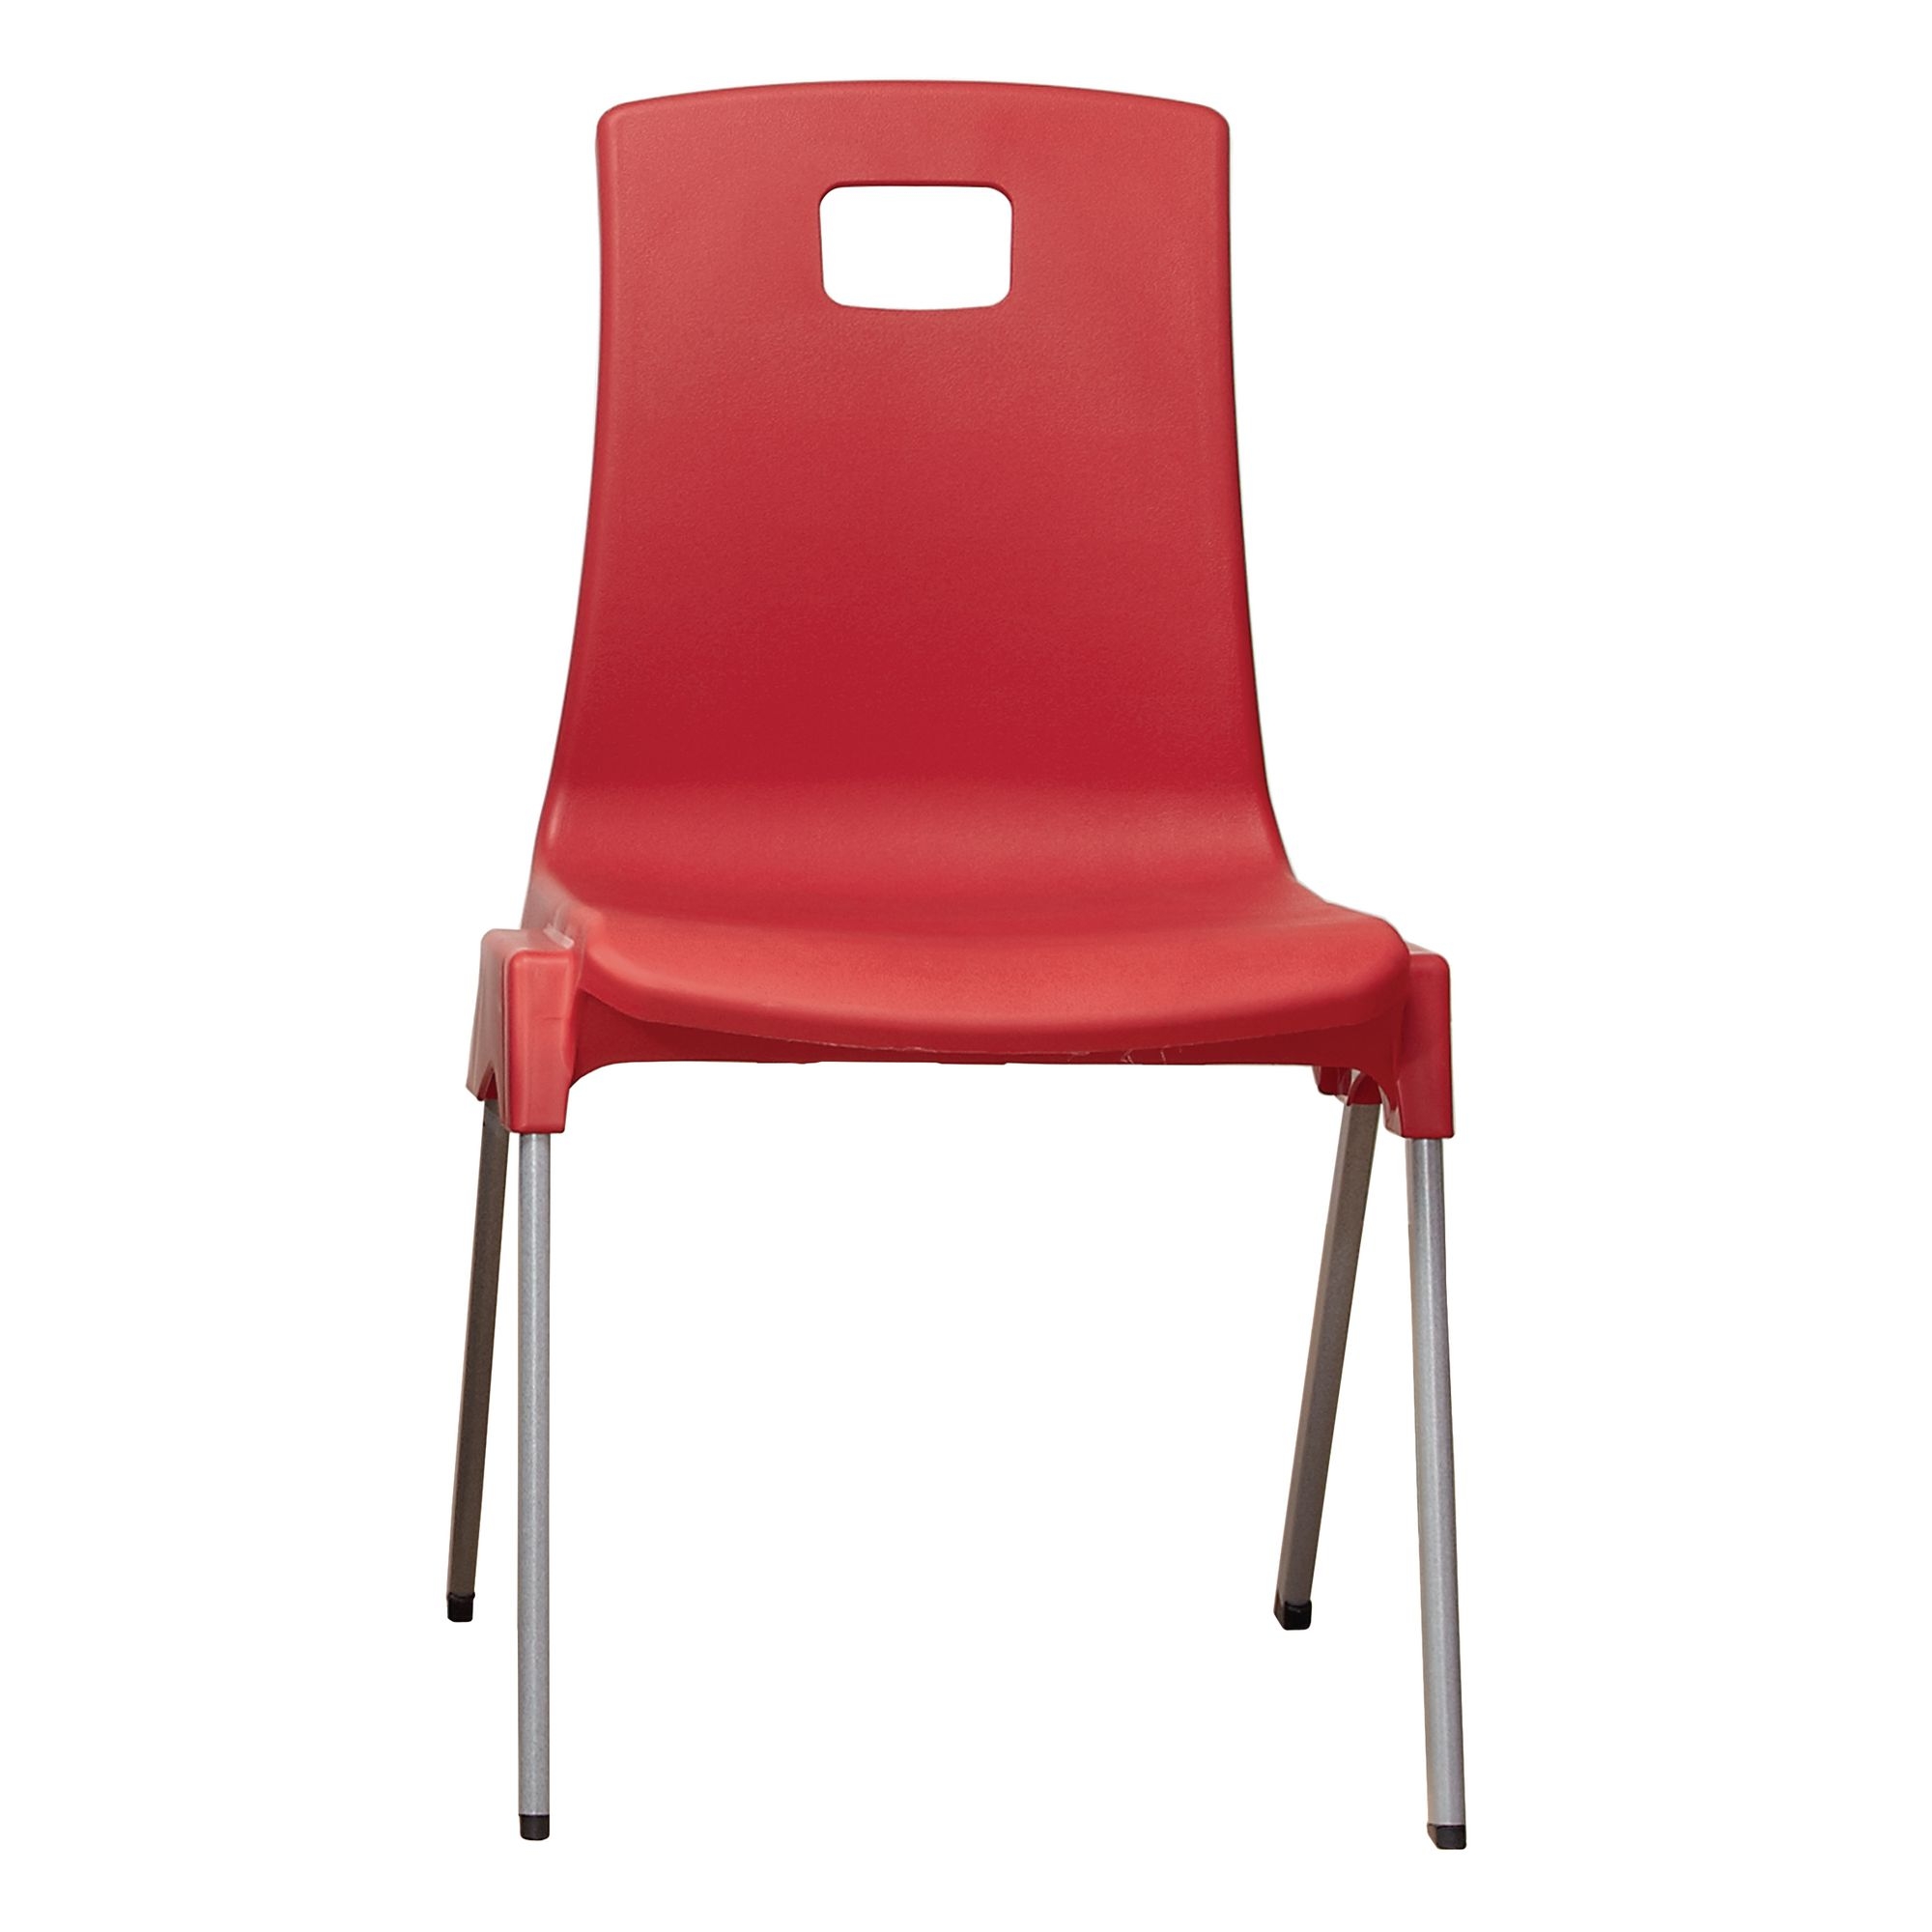 ST Chair - Size C - 350mm- Red